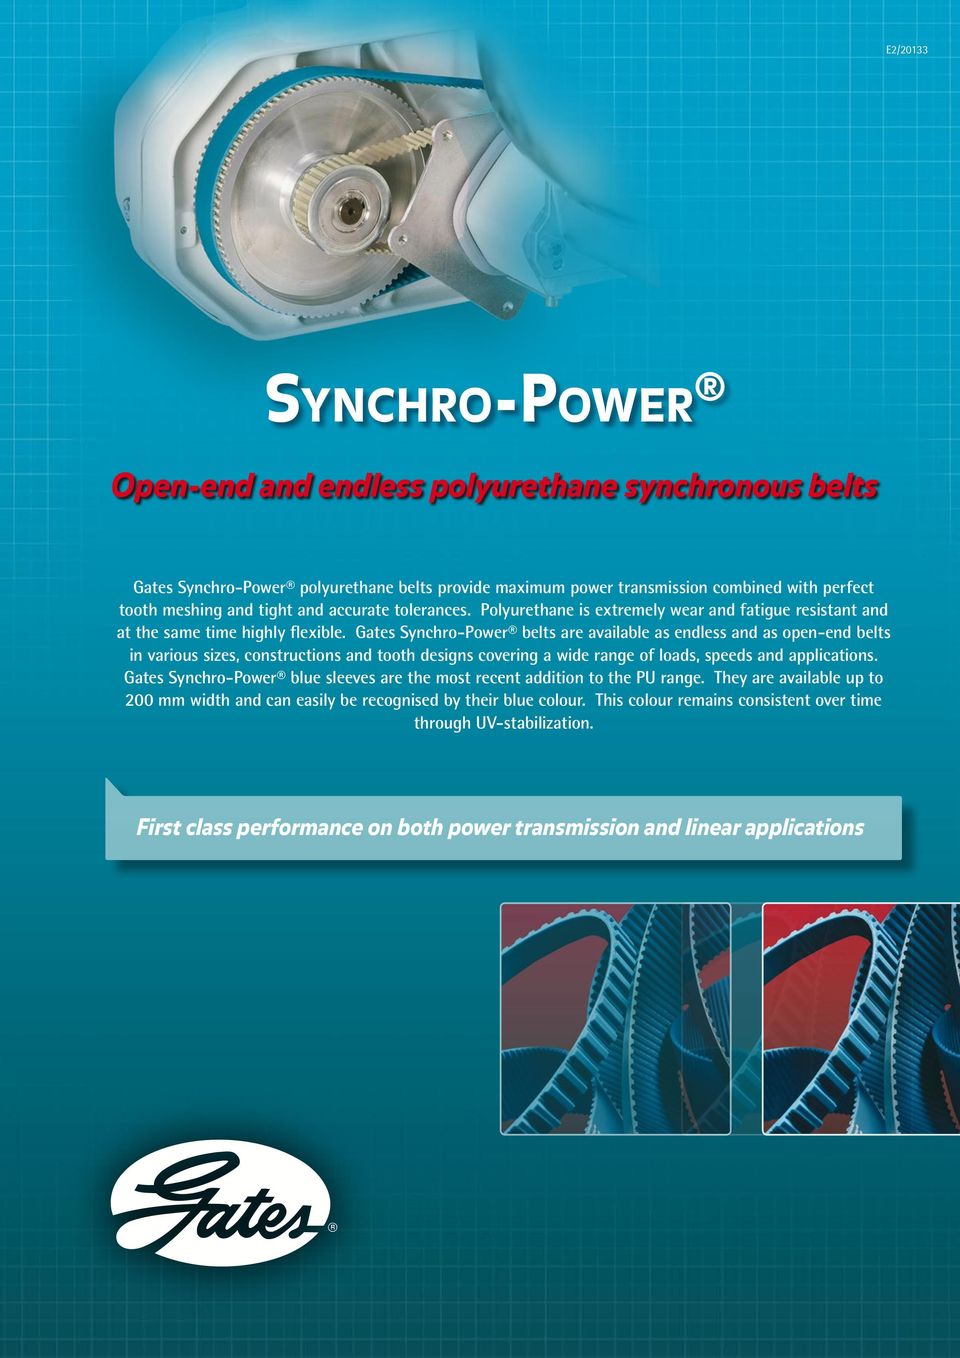 Gates Synchro-Power belts are available as endless and as open-end belts in various sizes, constructions and tooth designs covering a wide range of loads, speeds and applications.